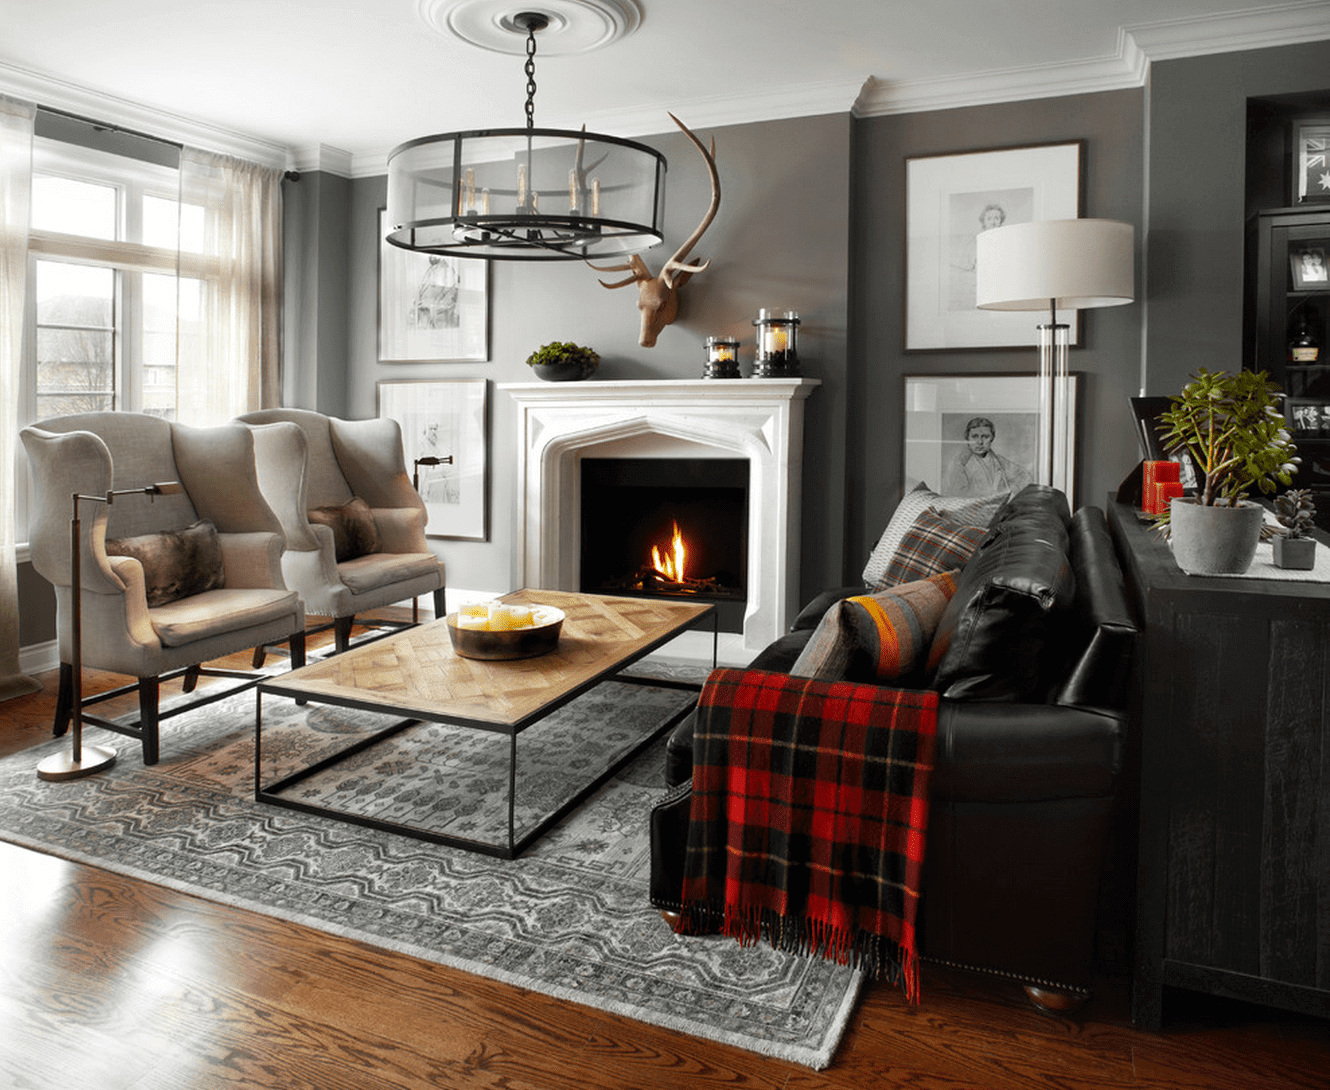 living room cozy warm decor designs amazing keep interior rooms decorating fall winter bit some victorian update townhouse prev next